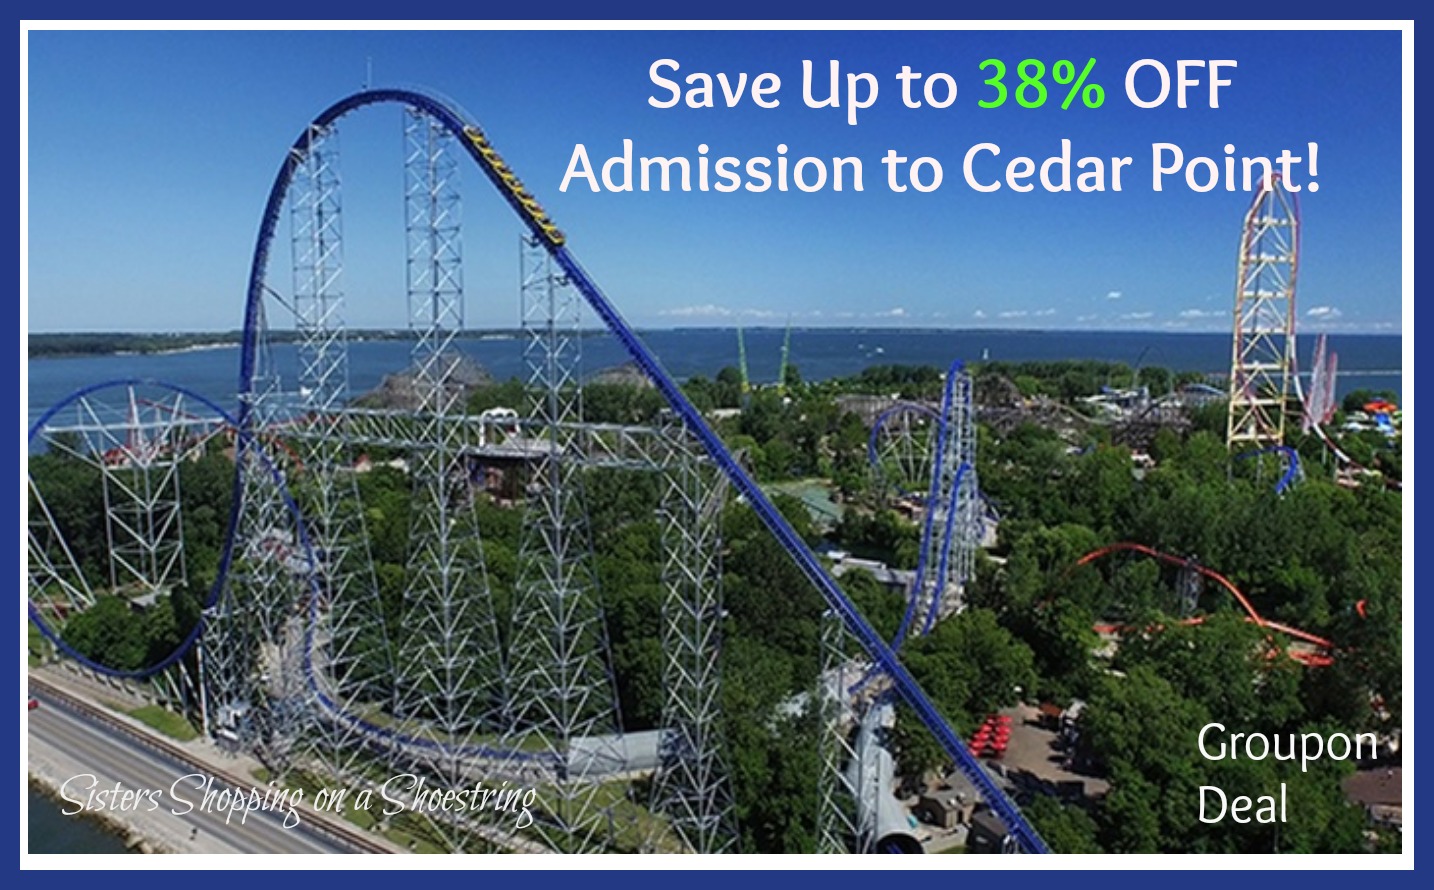 Groupon Deal Save Up To 38 Off One Or Two Day Admission For Cedar Point